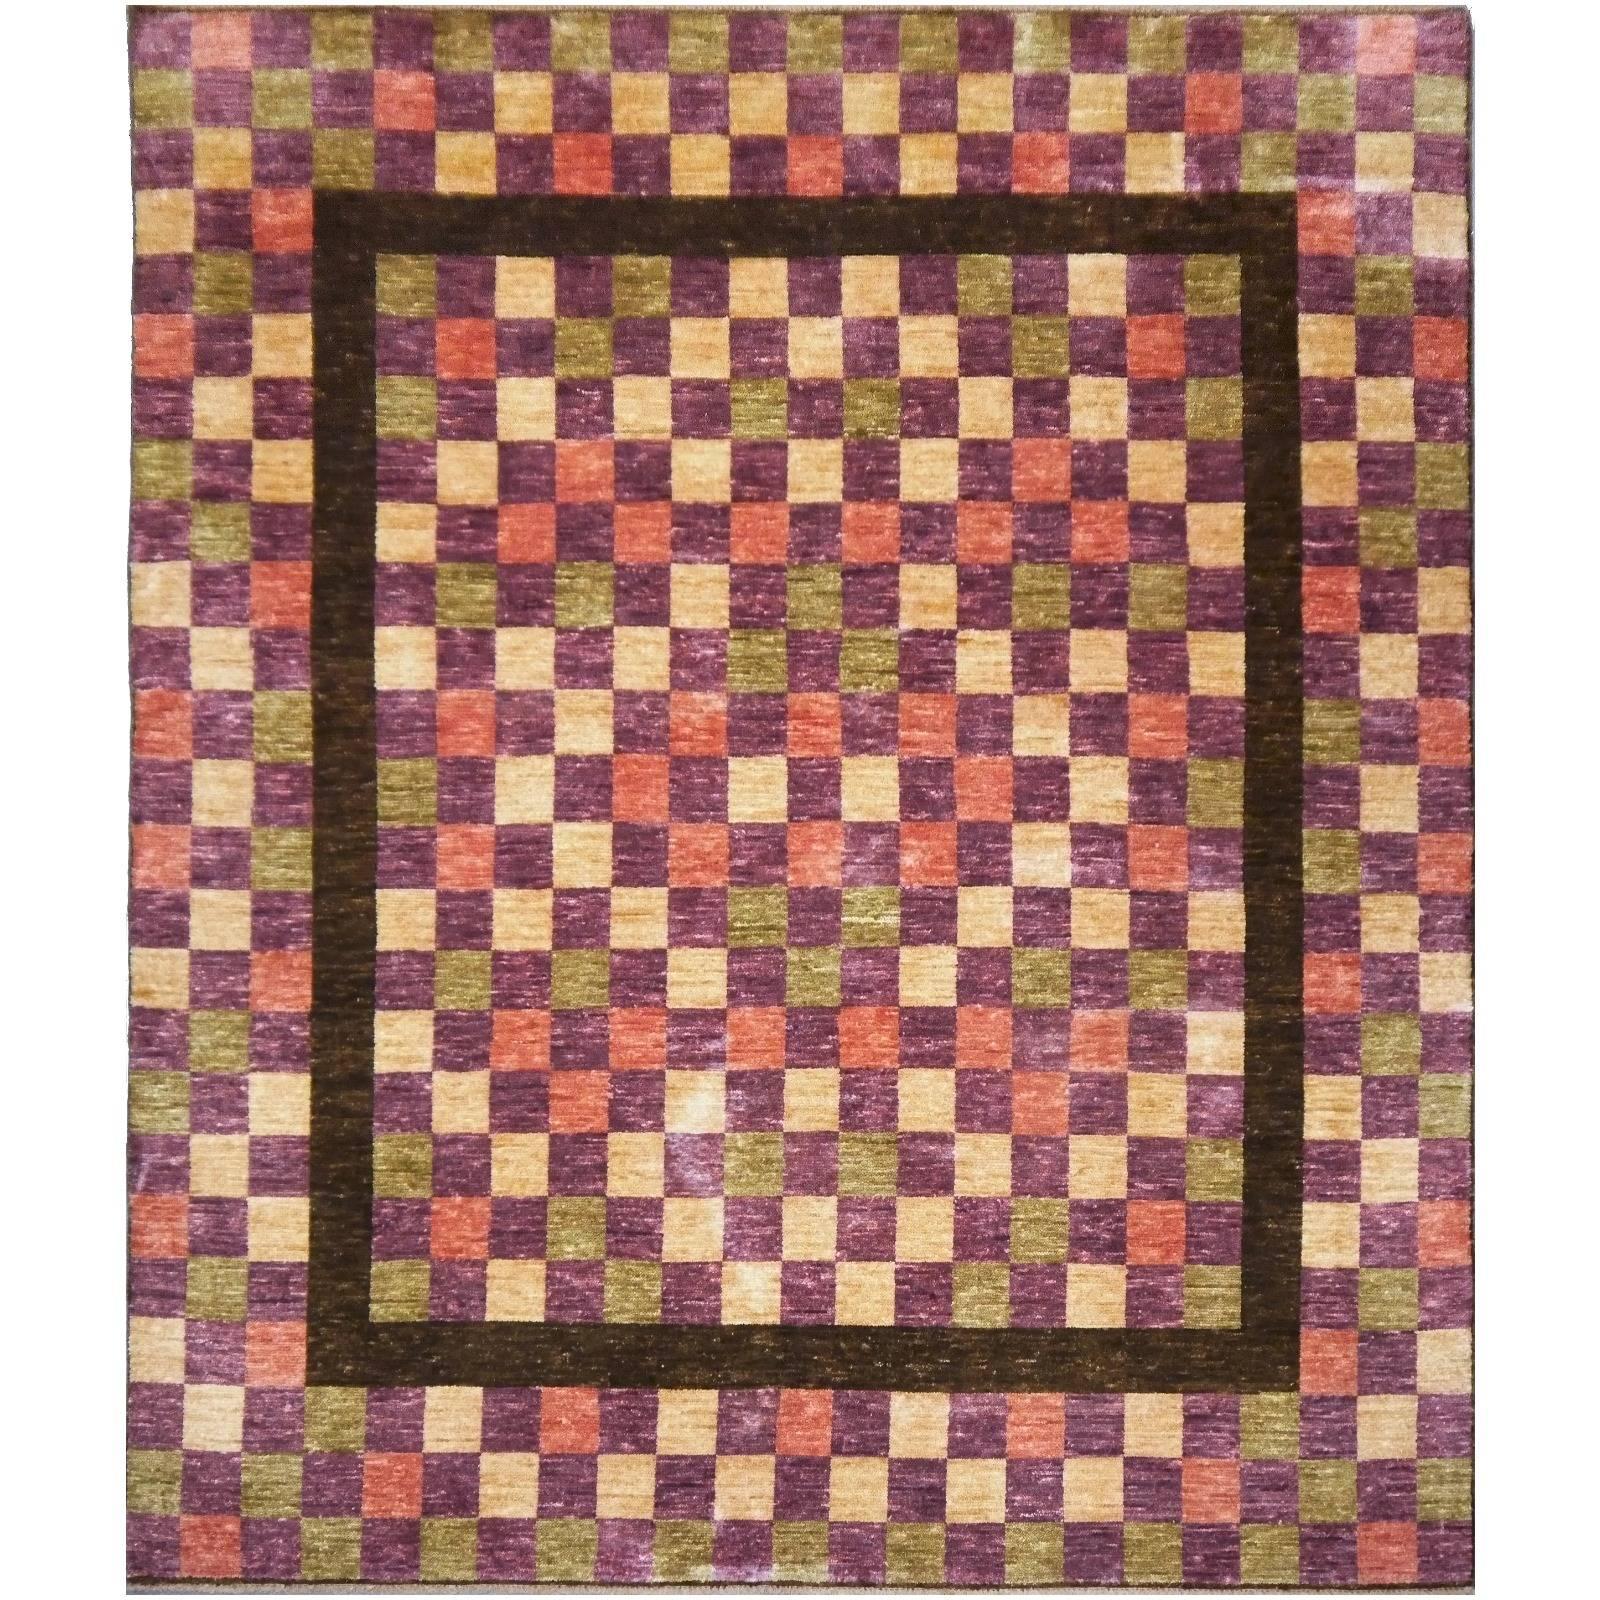 Modern Cubist Style Rug hand knotted wool carpet cirva 9 x 9 ft Coral Lilac  For Sale